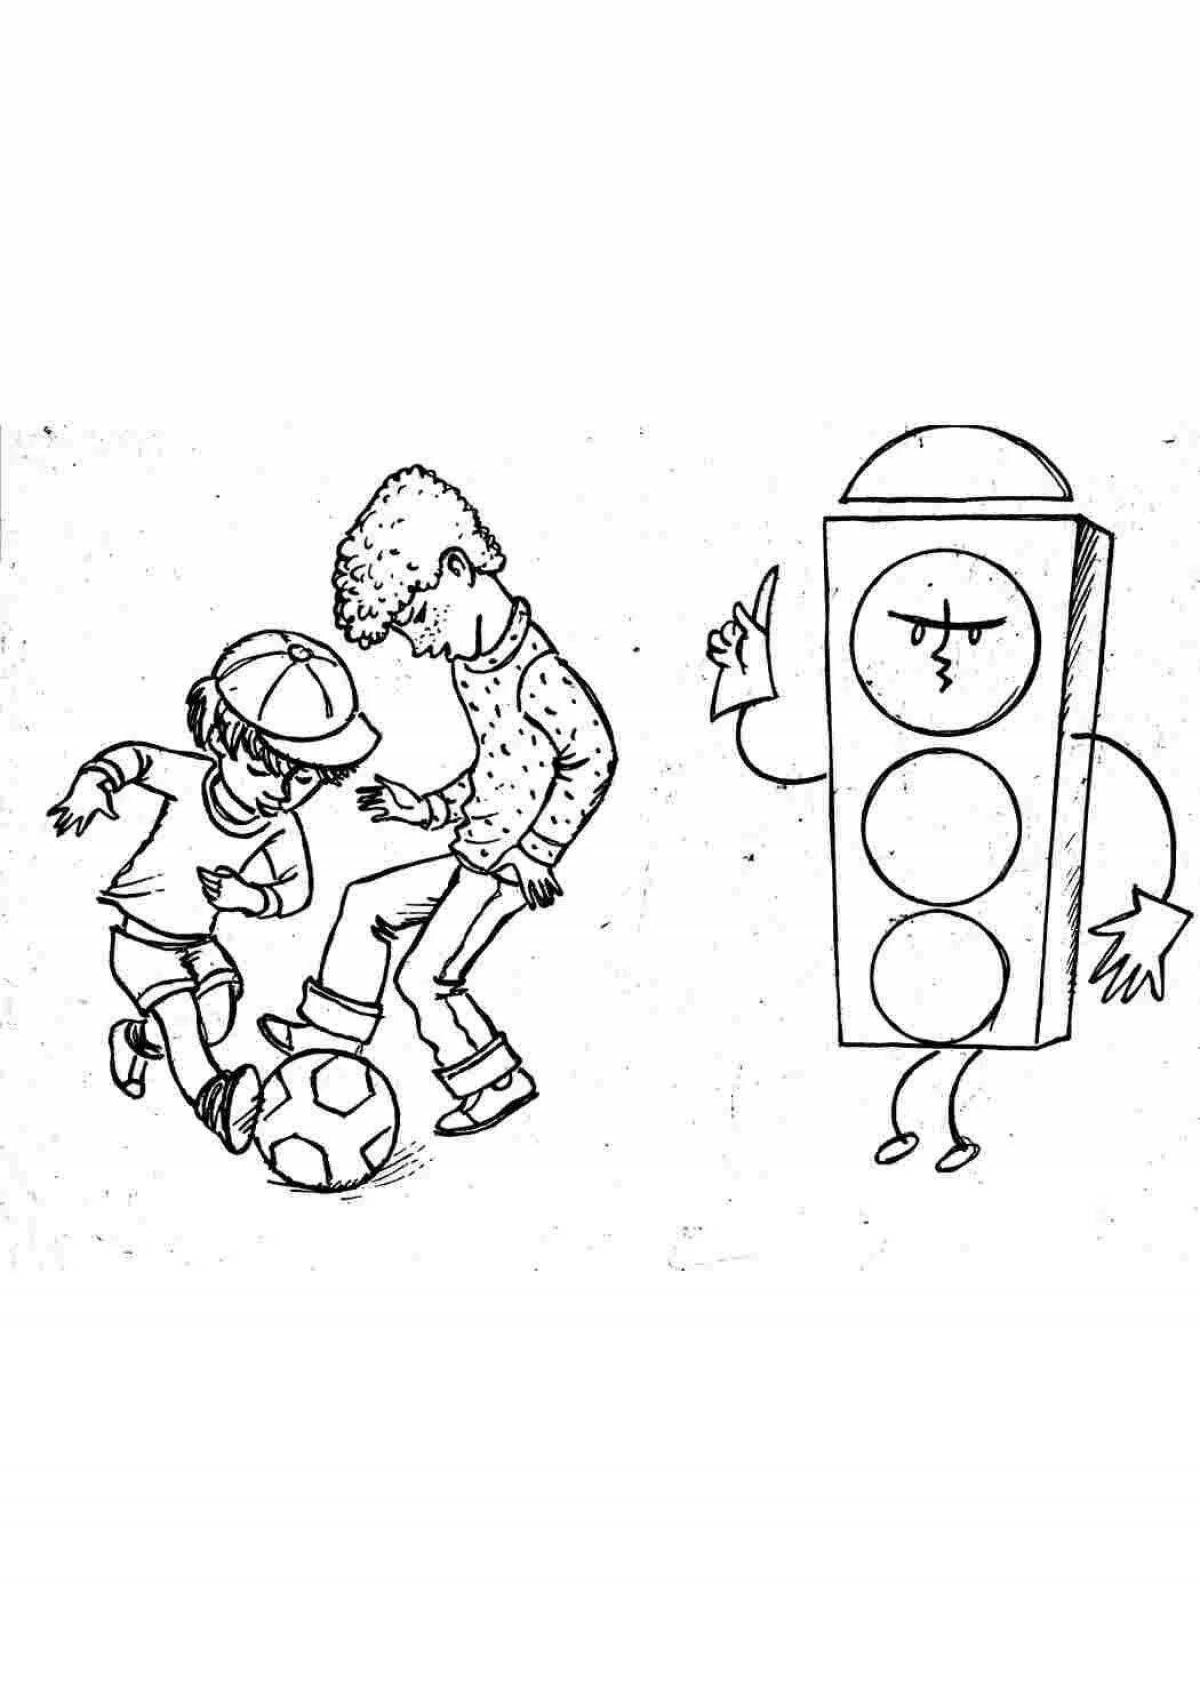 Bright traffic light coloring pages for kids